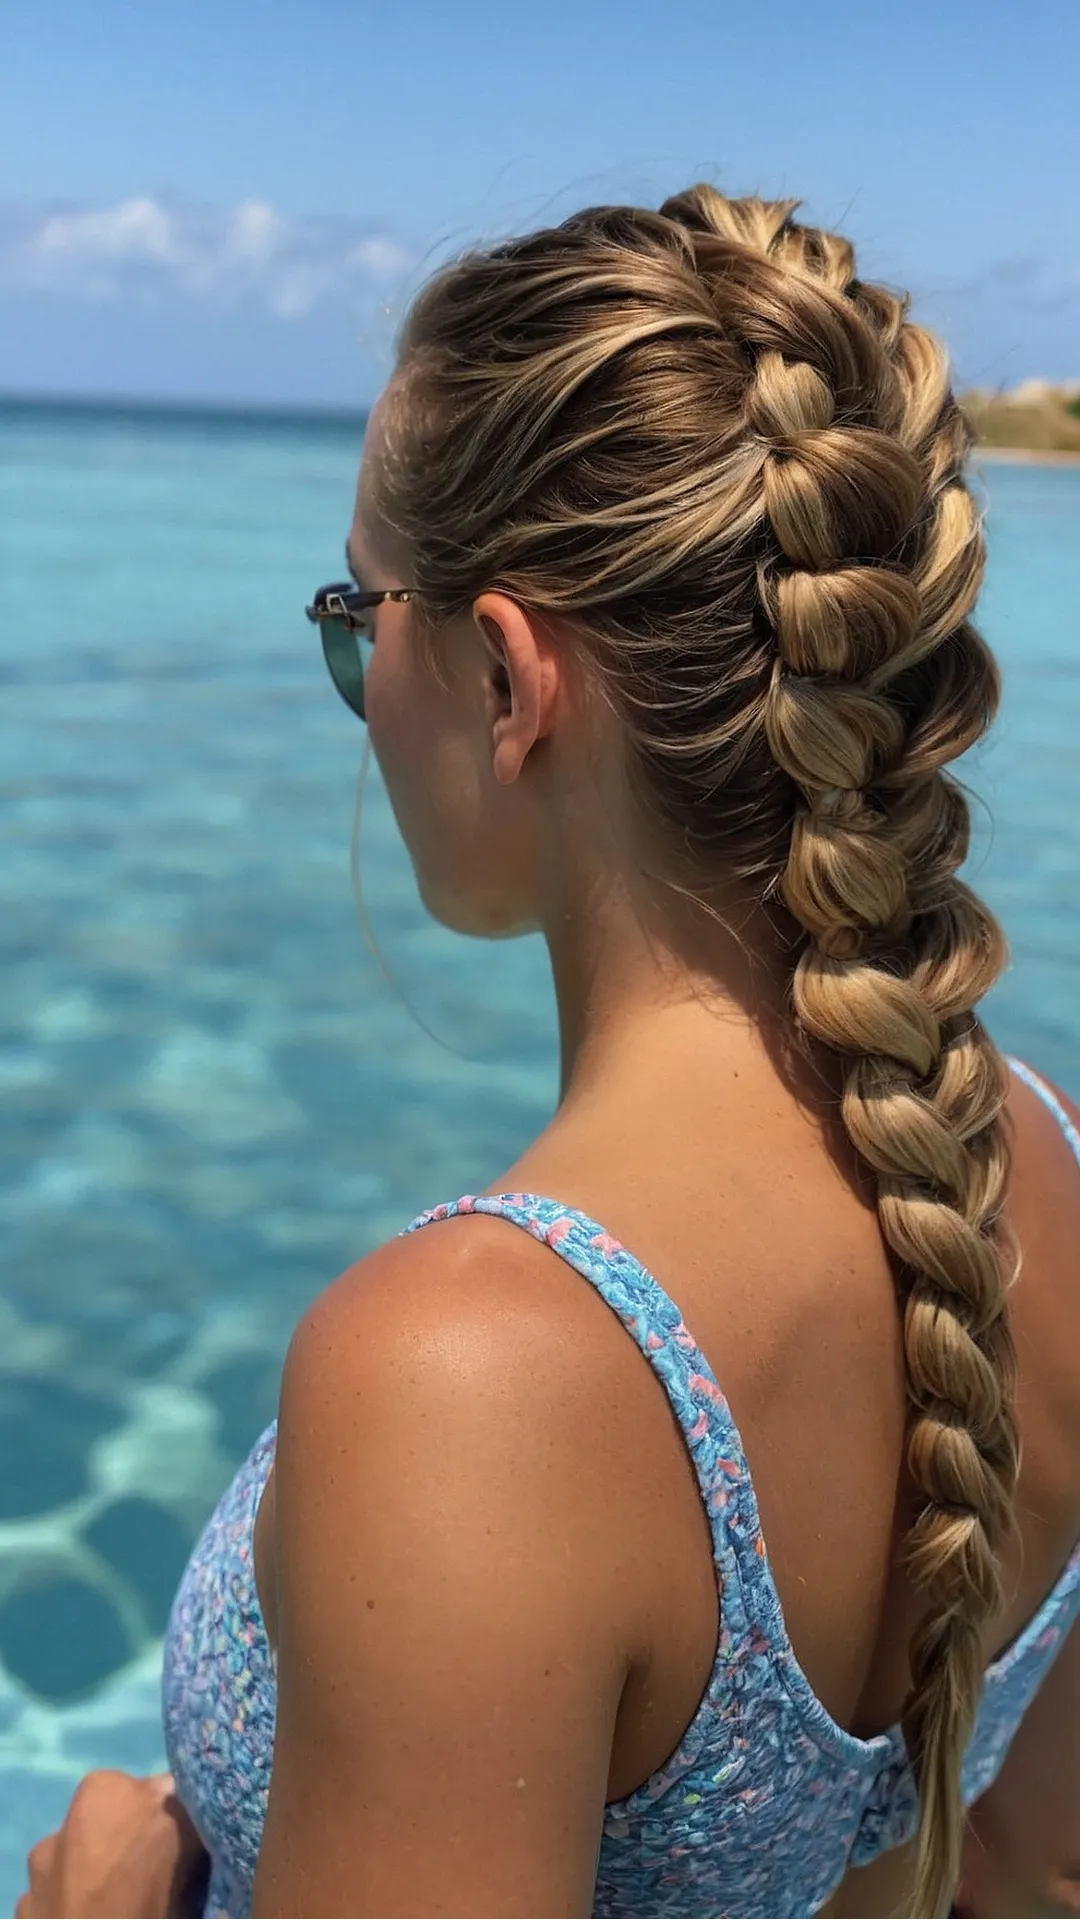 Sizzle by the Pool: Trendy Hair Ideas